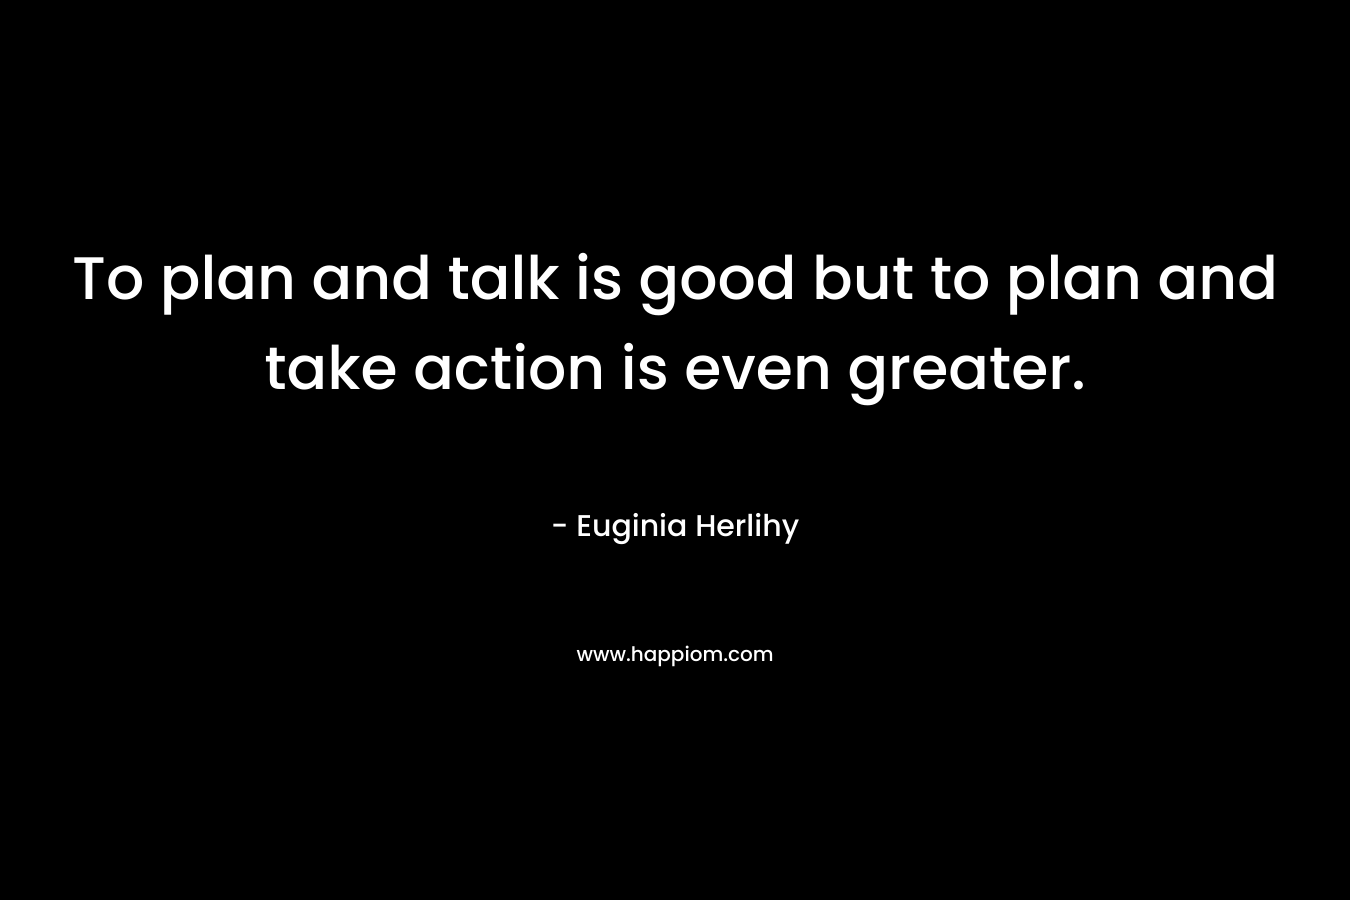 To plan and talk is good but to plan and take action is even greater.